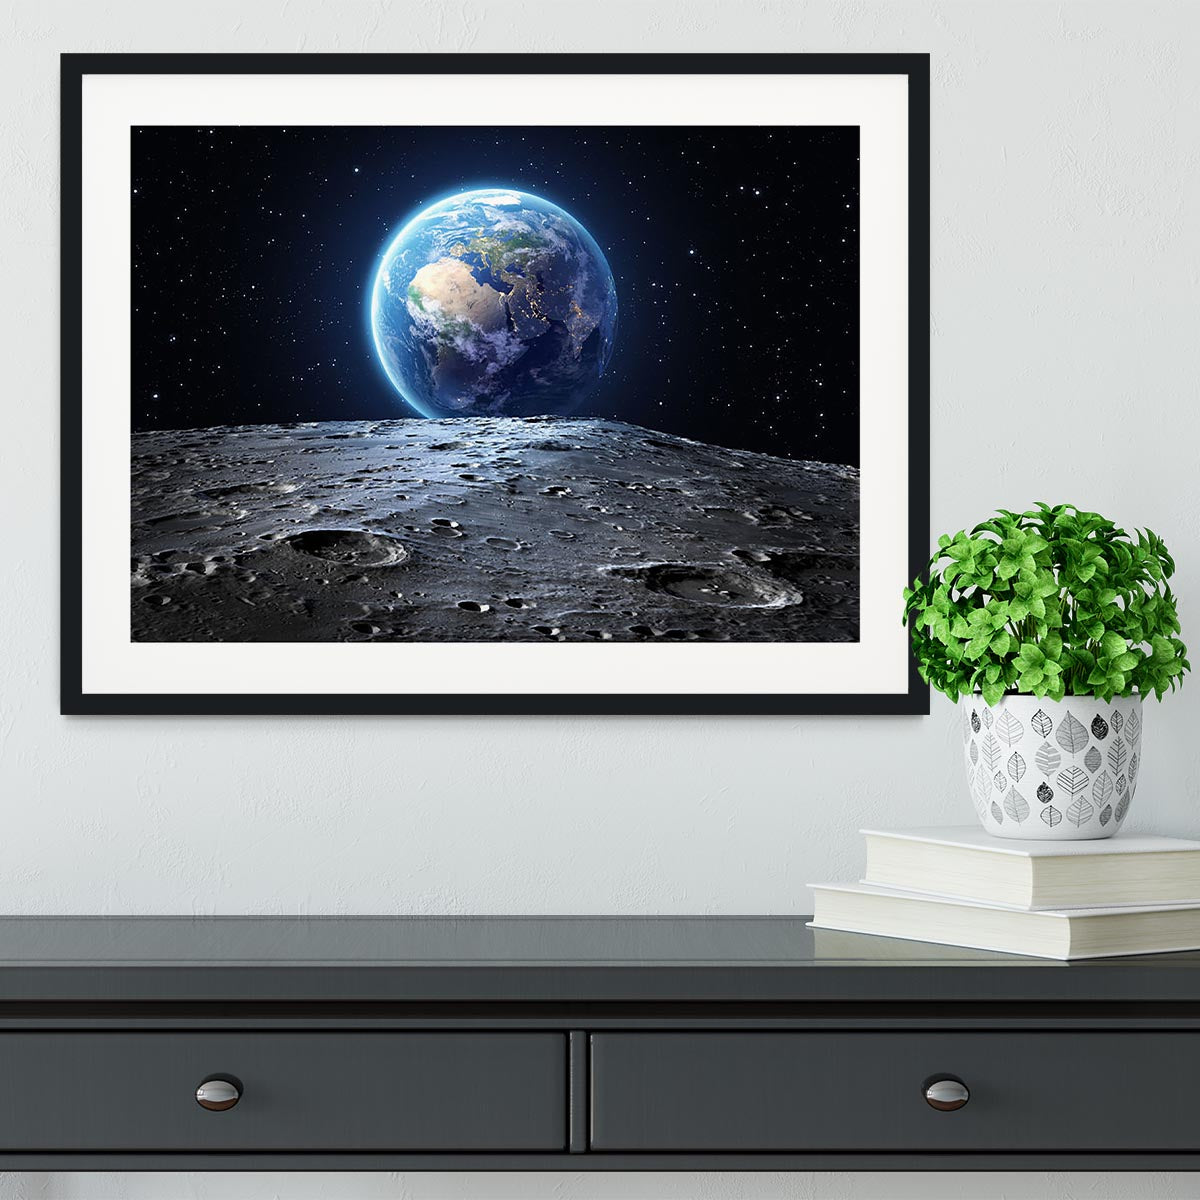 Blue earth seen from the moon surface Framed Print - Canvas Art Rocks - 1